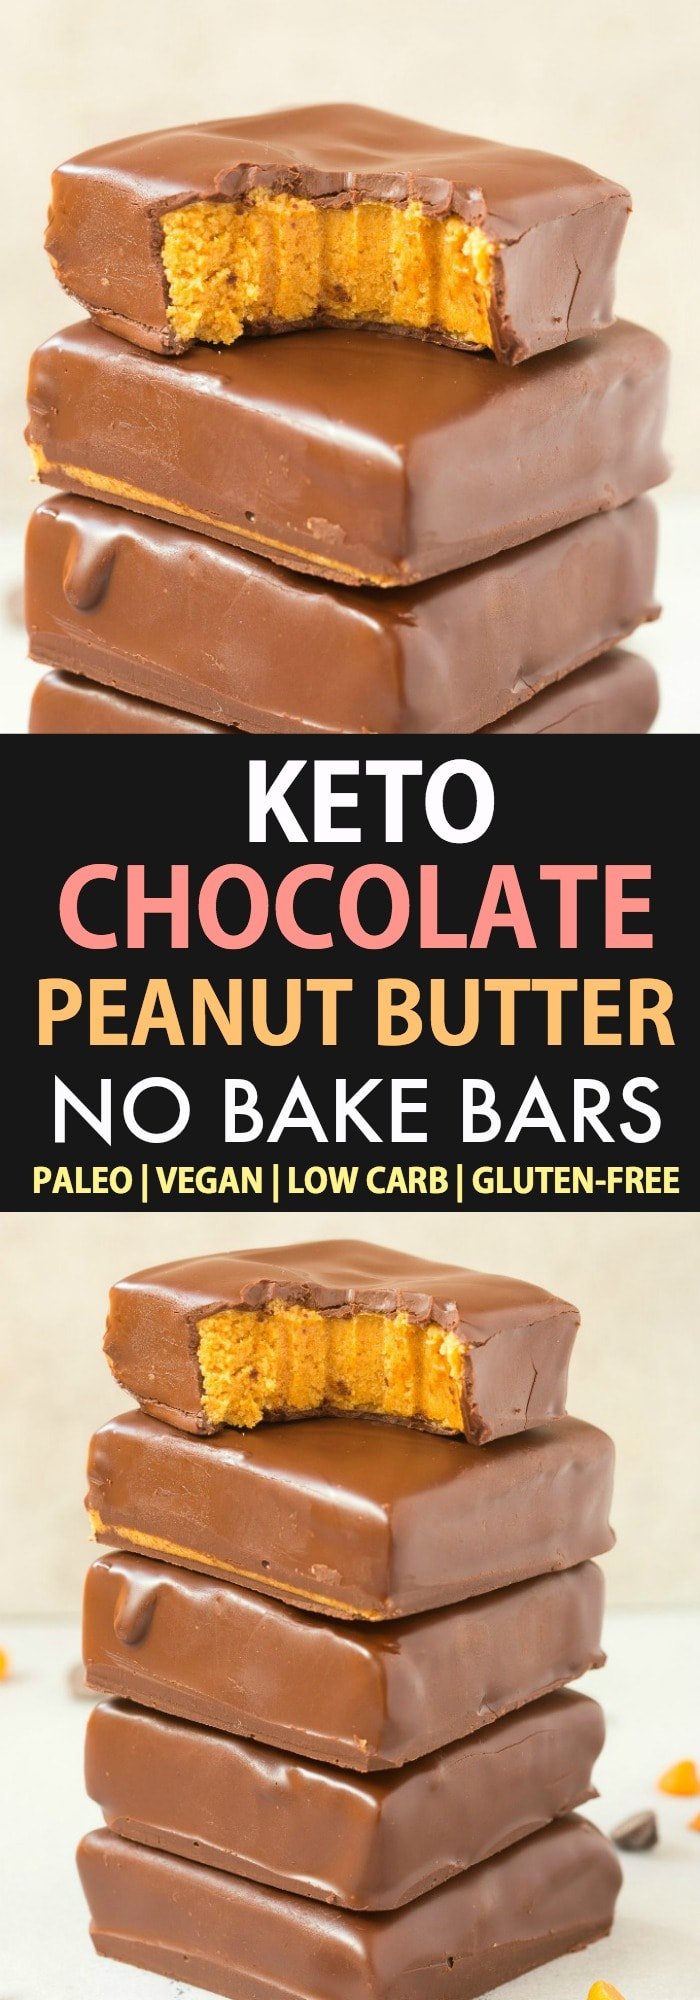 A collage featuring two images of keto chocolate peanut butter no bake bars, with the text saying Keto Chocolate Peanut Butter No Bake Bars. 